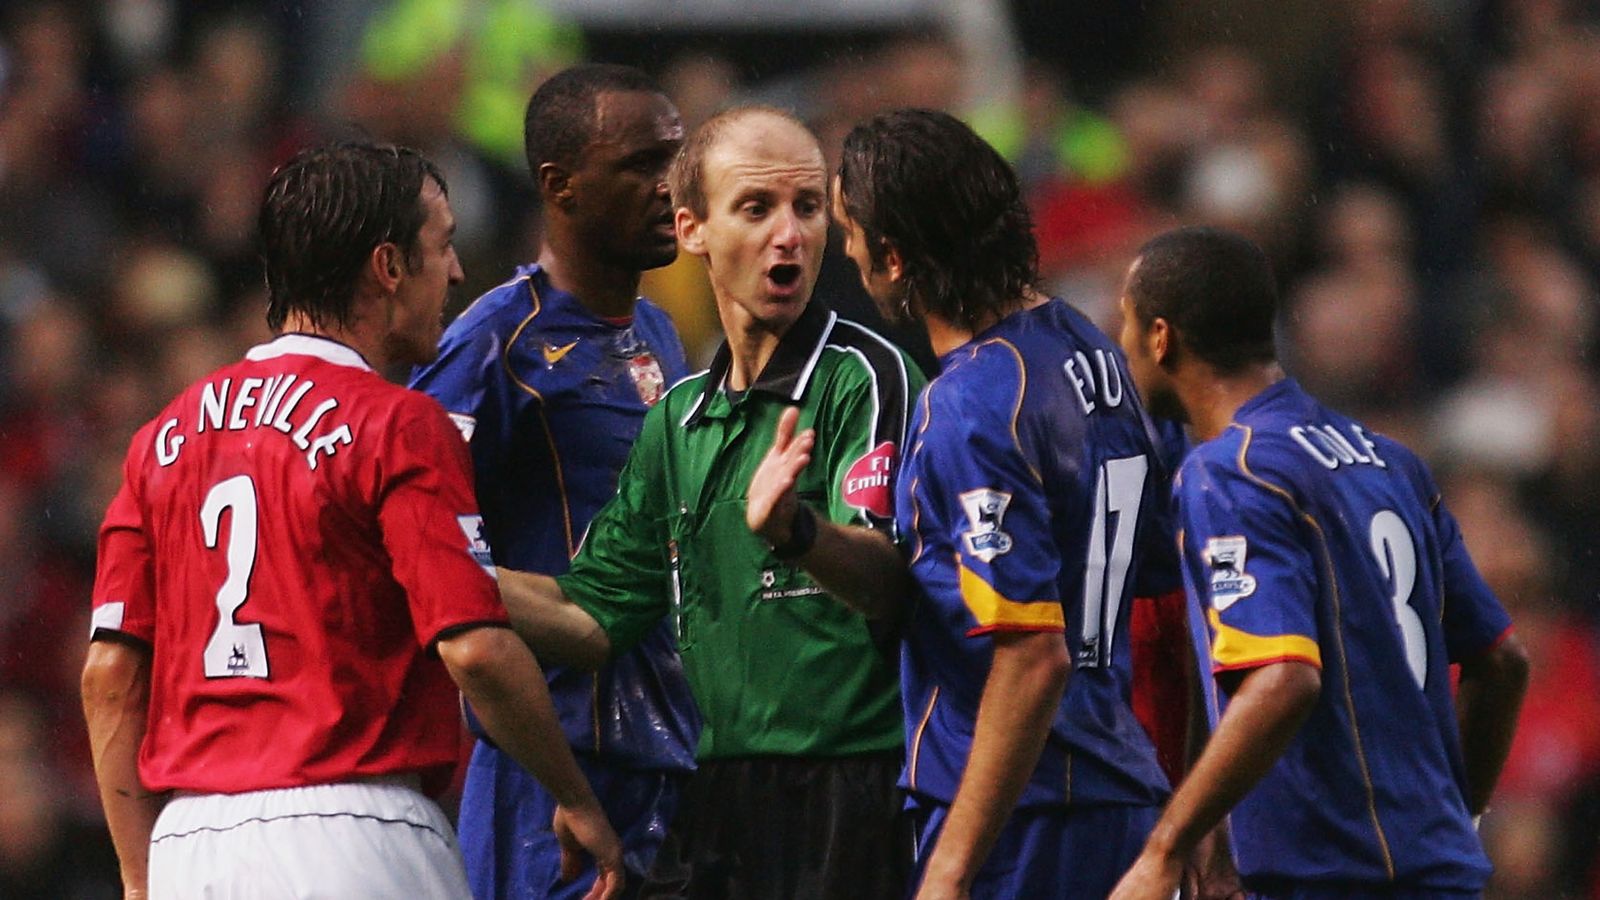 Ref Watch: Manchester Utd vs Arsenal 2004 special - Would VAR have saved The Invincibles? | Football News | Sky Sports